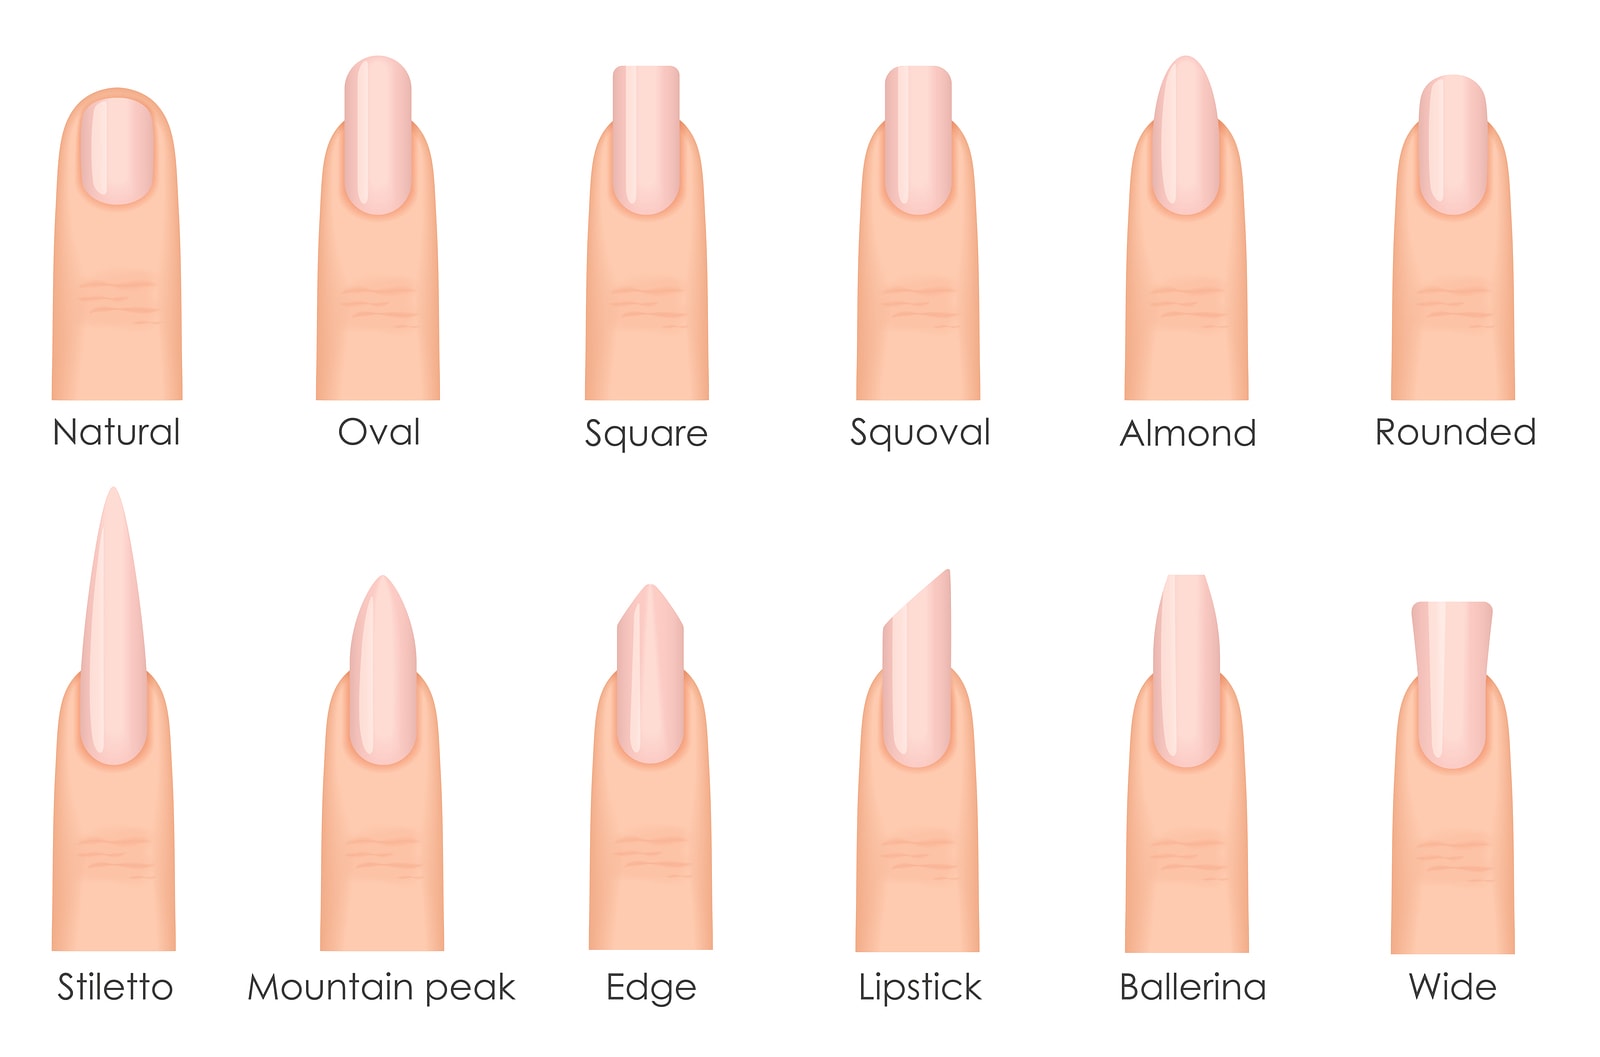 5 Perfect Nail Shapes and How to Achieve Them! - LivOliv Cosmetics